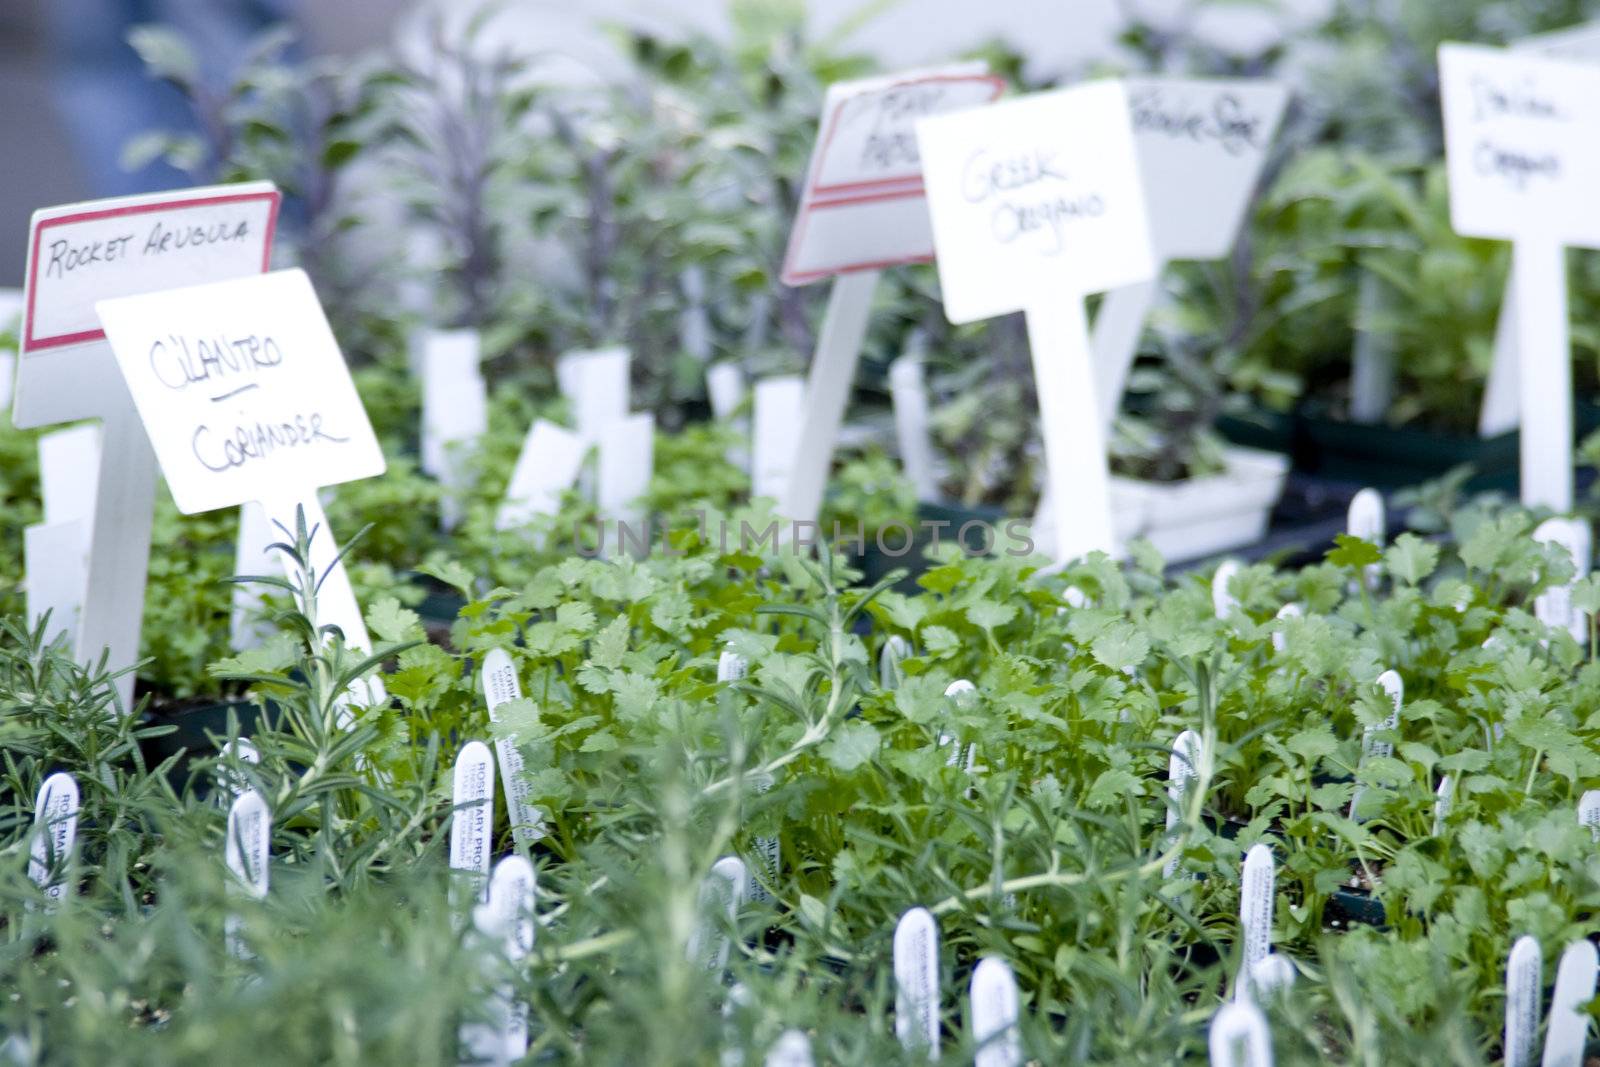 Herb plants for sale at the Union Square Growers Market, New York City on Memorial Day 2008.